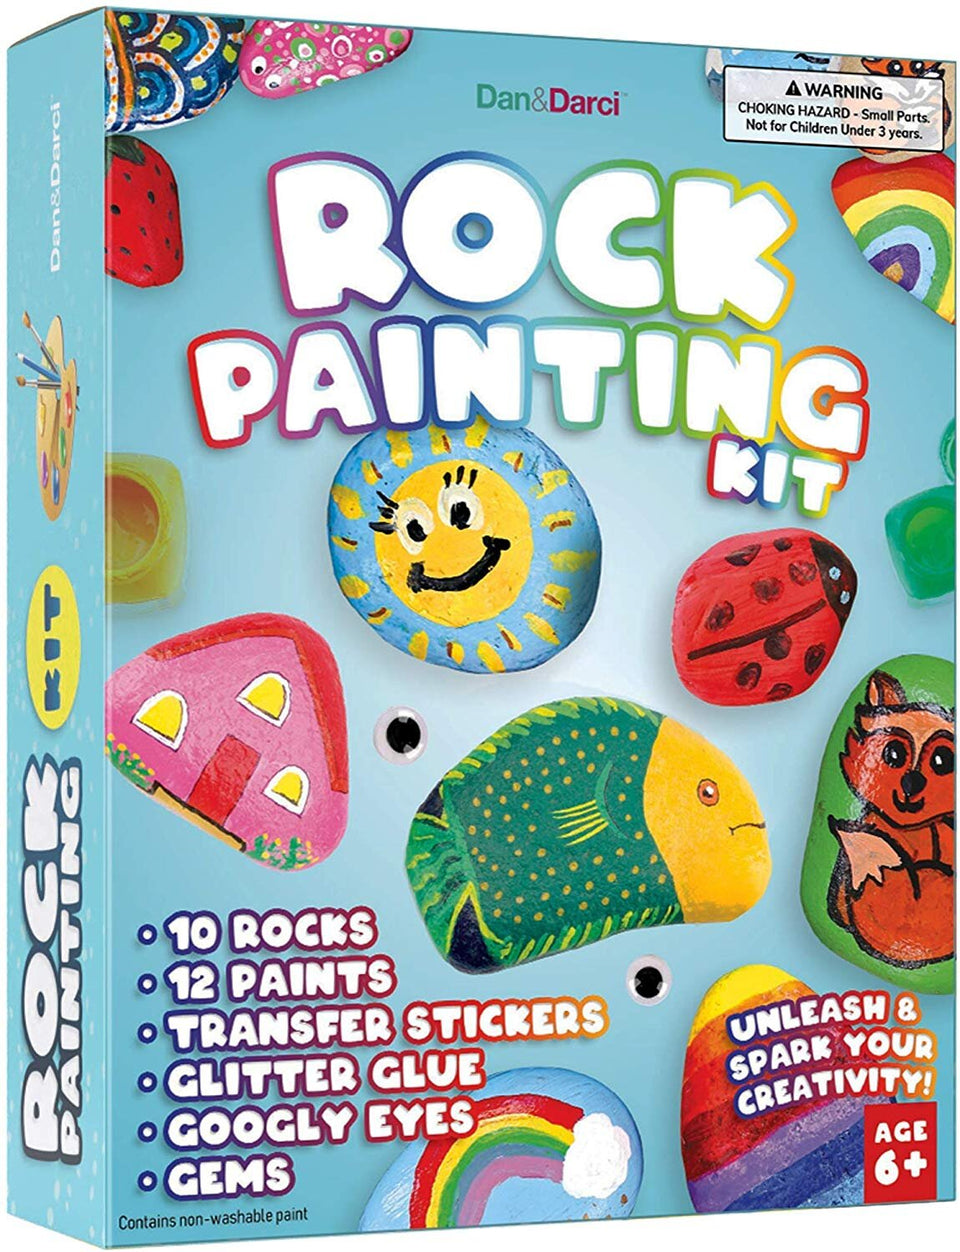 Rock Painting Kit for Kids by Surreal Brands